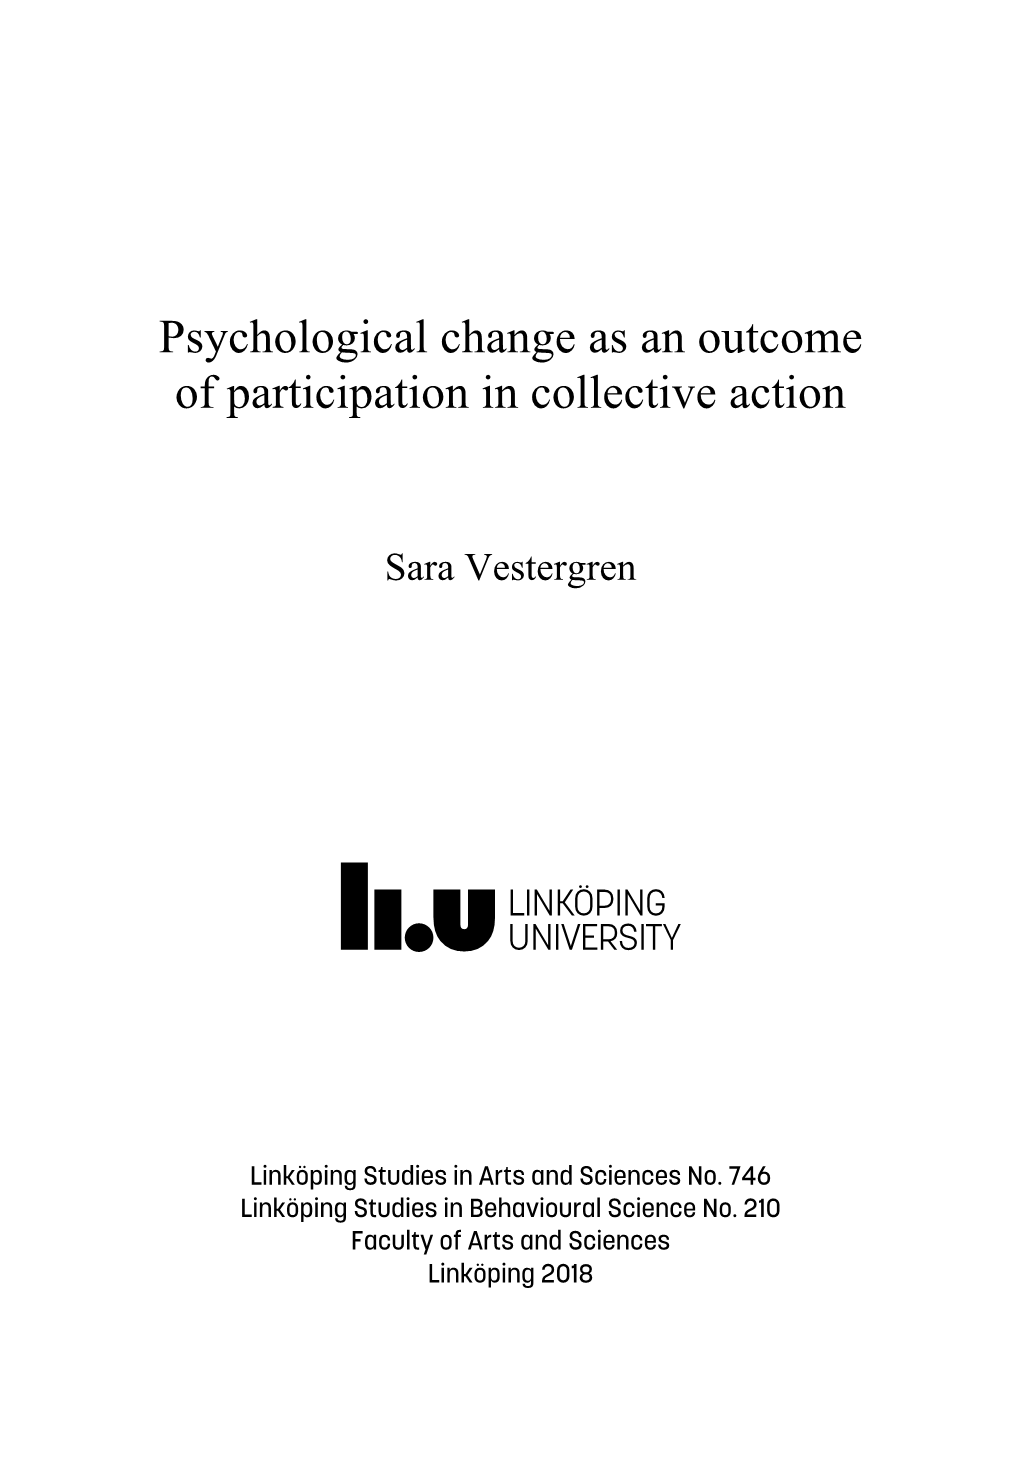 Psychological Change As an Outcome of Participation in Collective Action